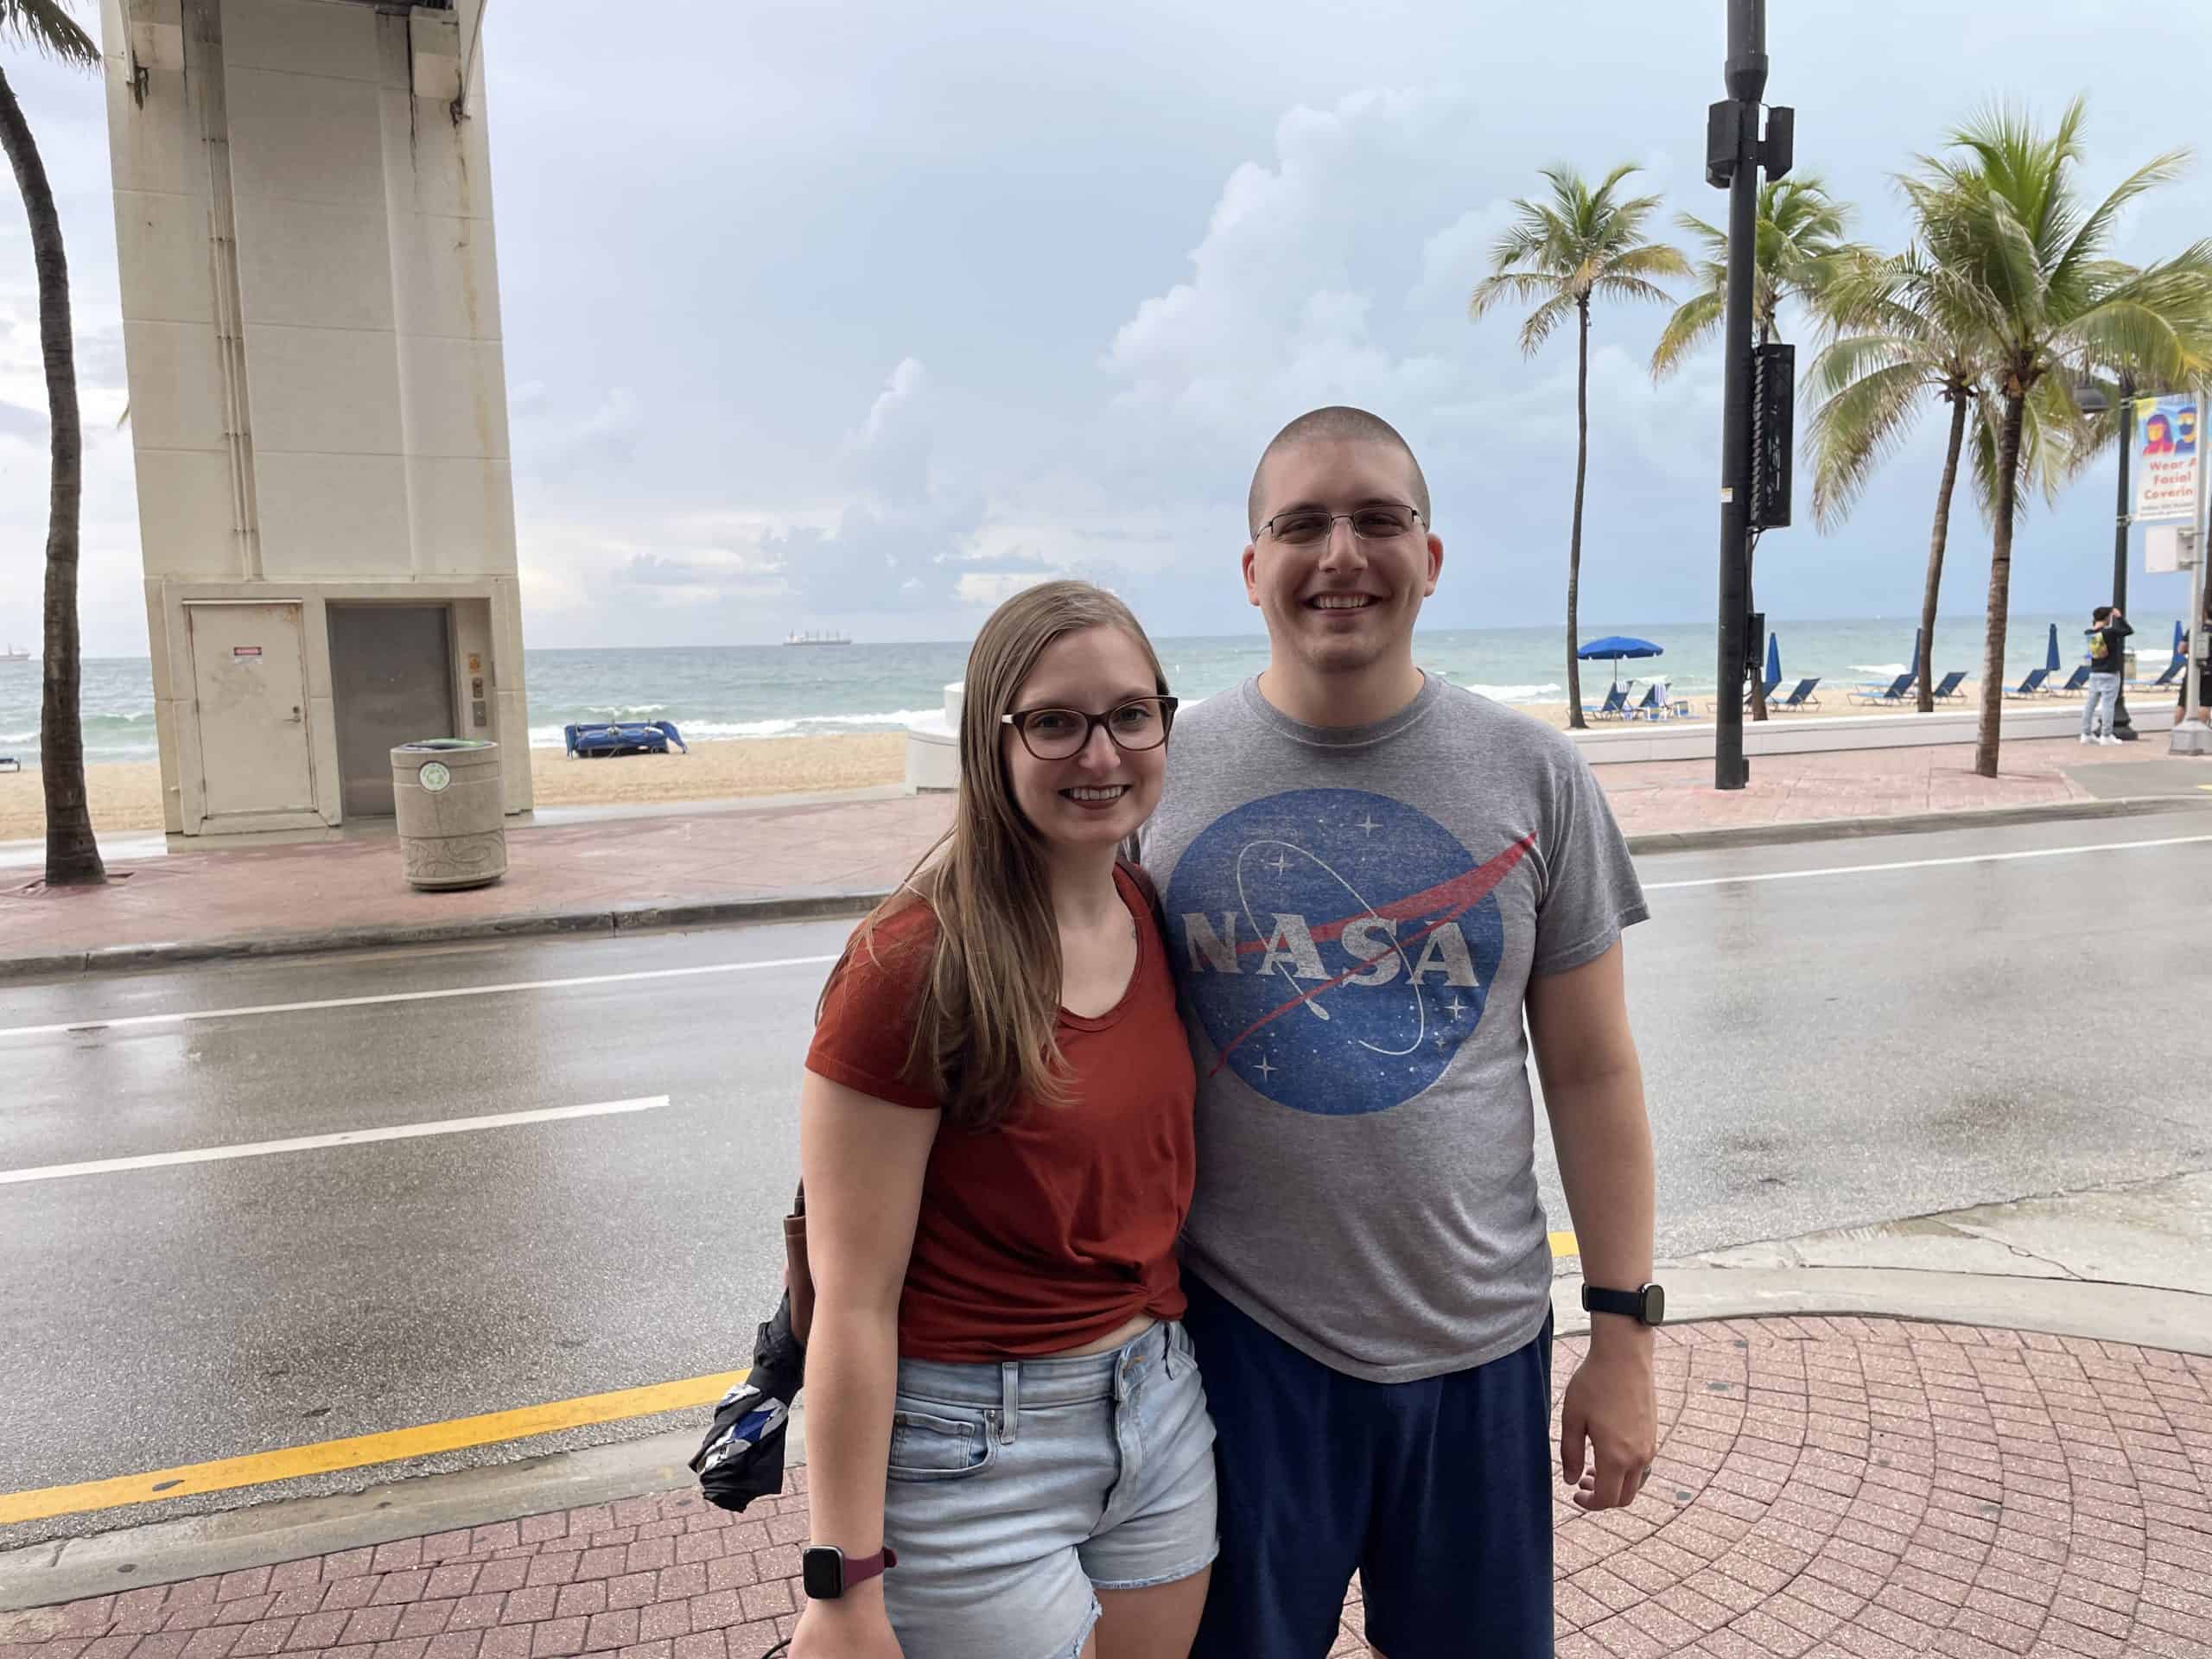 Jeremy and Morgan in Ft. Lauderdale